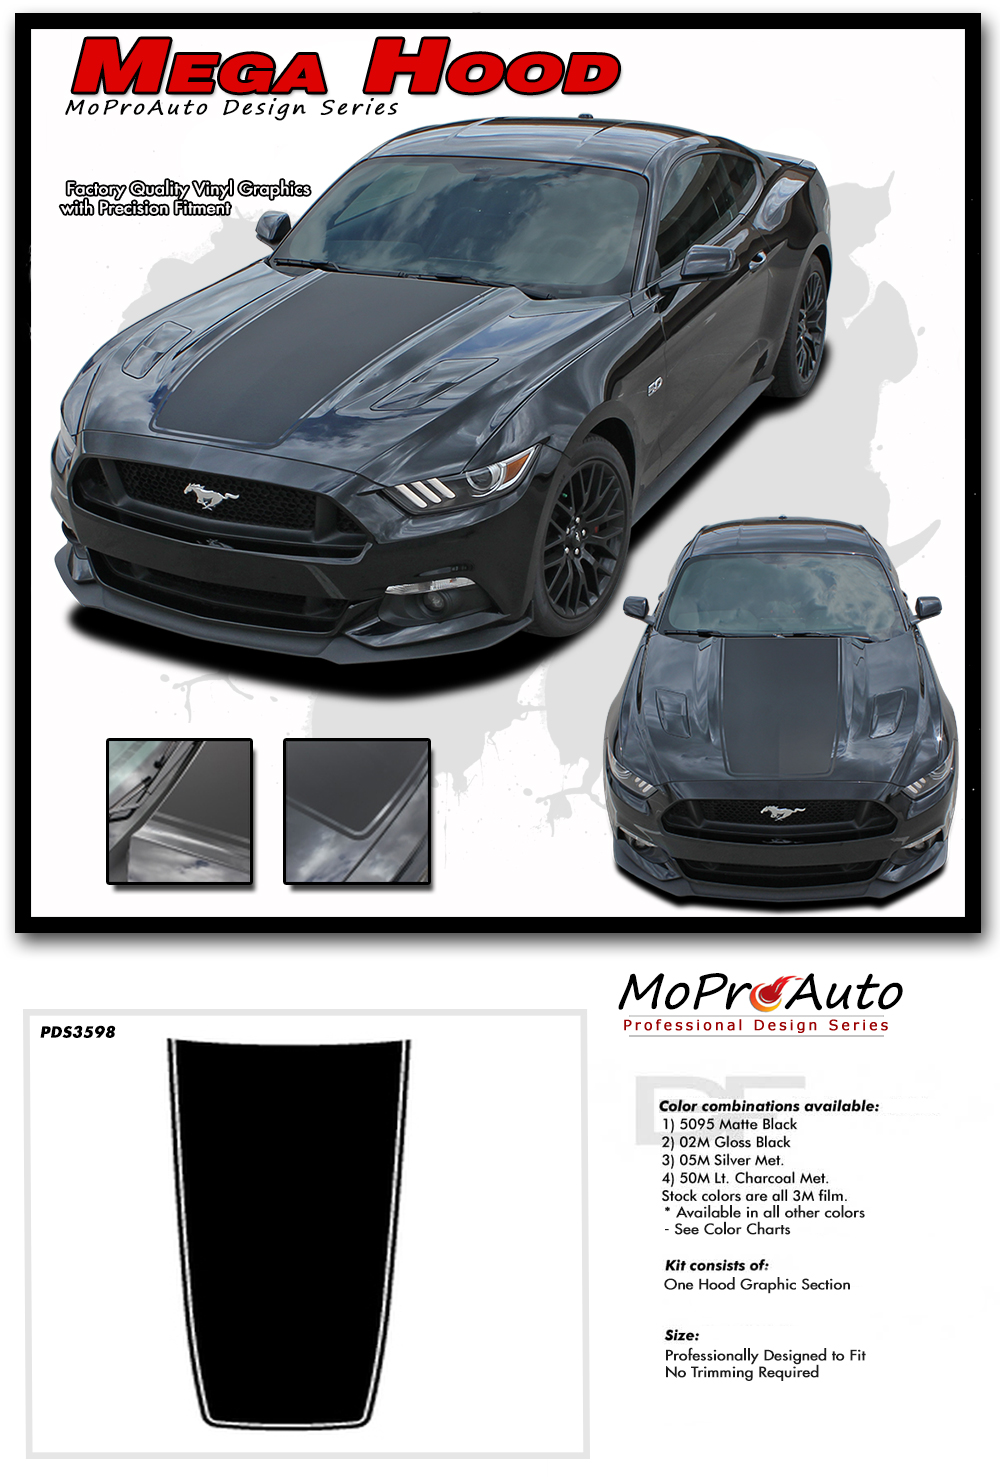 2015 2016 2017 Mega Hood Style Racing Stripes for Ford Mustang - MoProAuto Pro Design Series Vinyl Graphics, Stripes and Decals Kit